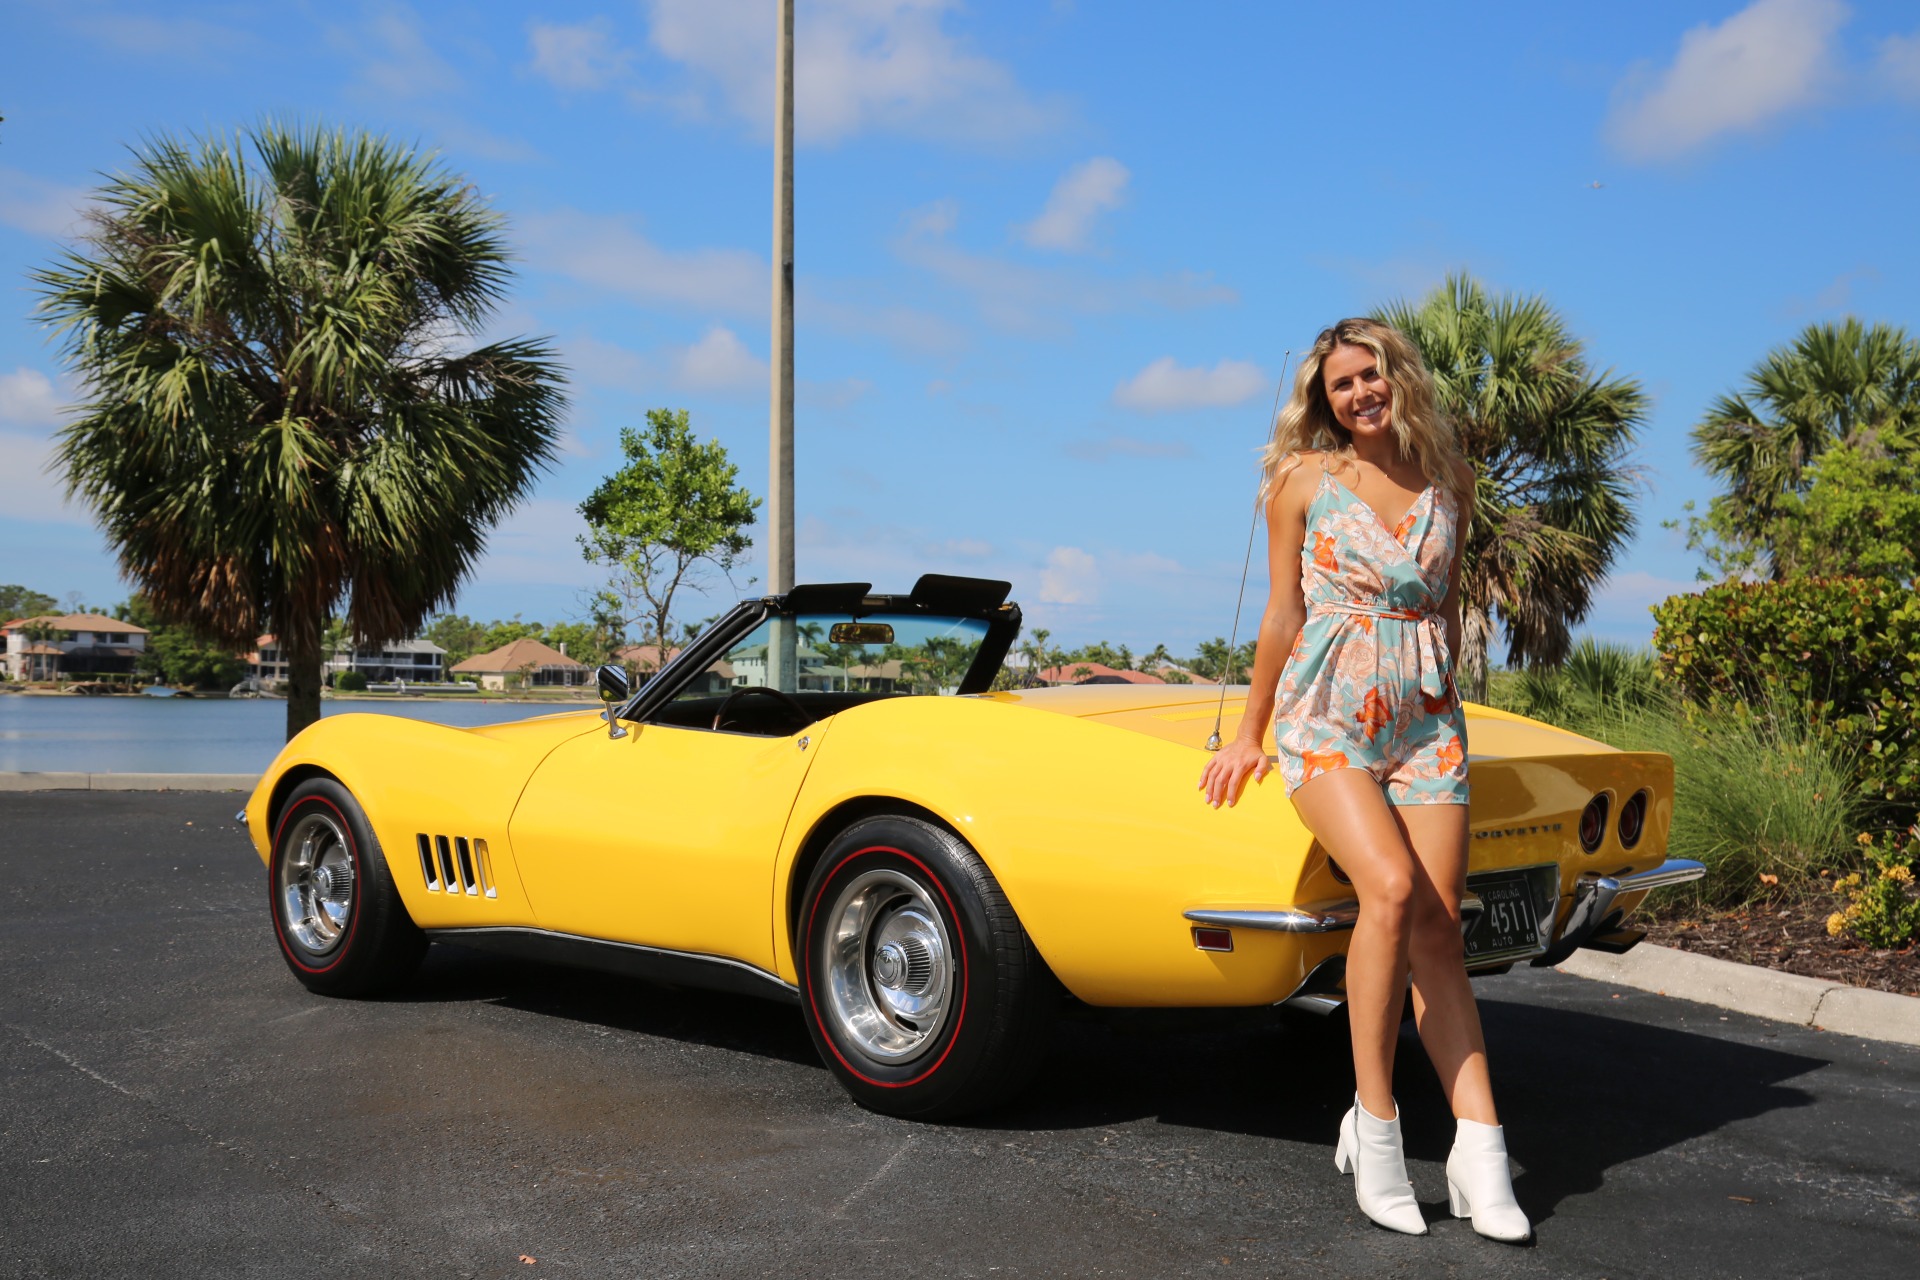 Used 1968 Chevrolet Corvette Stingray for sale Sold at Muscle Cars for Sale Inc. in Fort Myers FL 33912 4